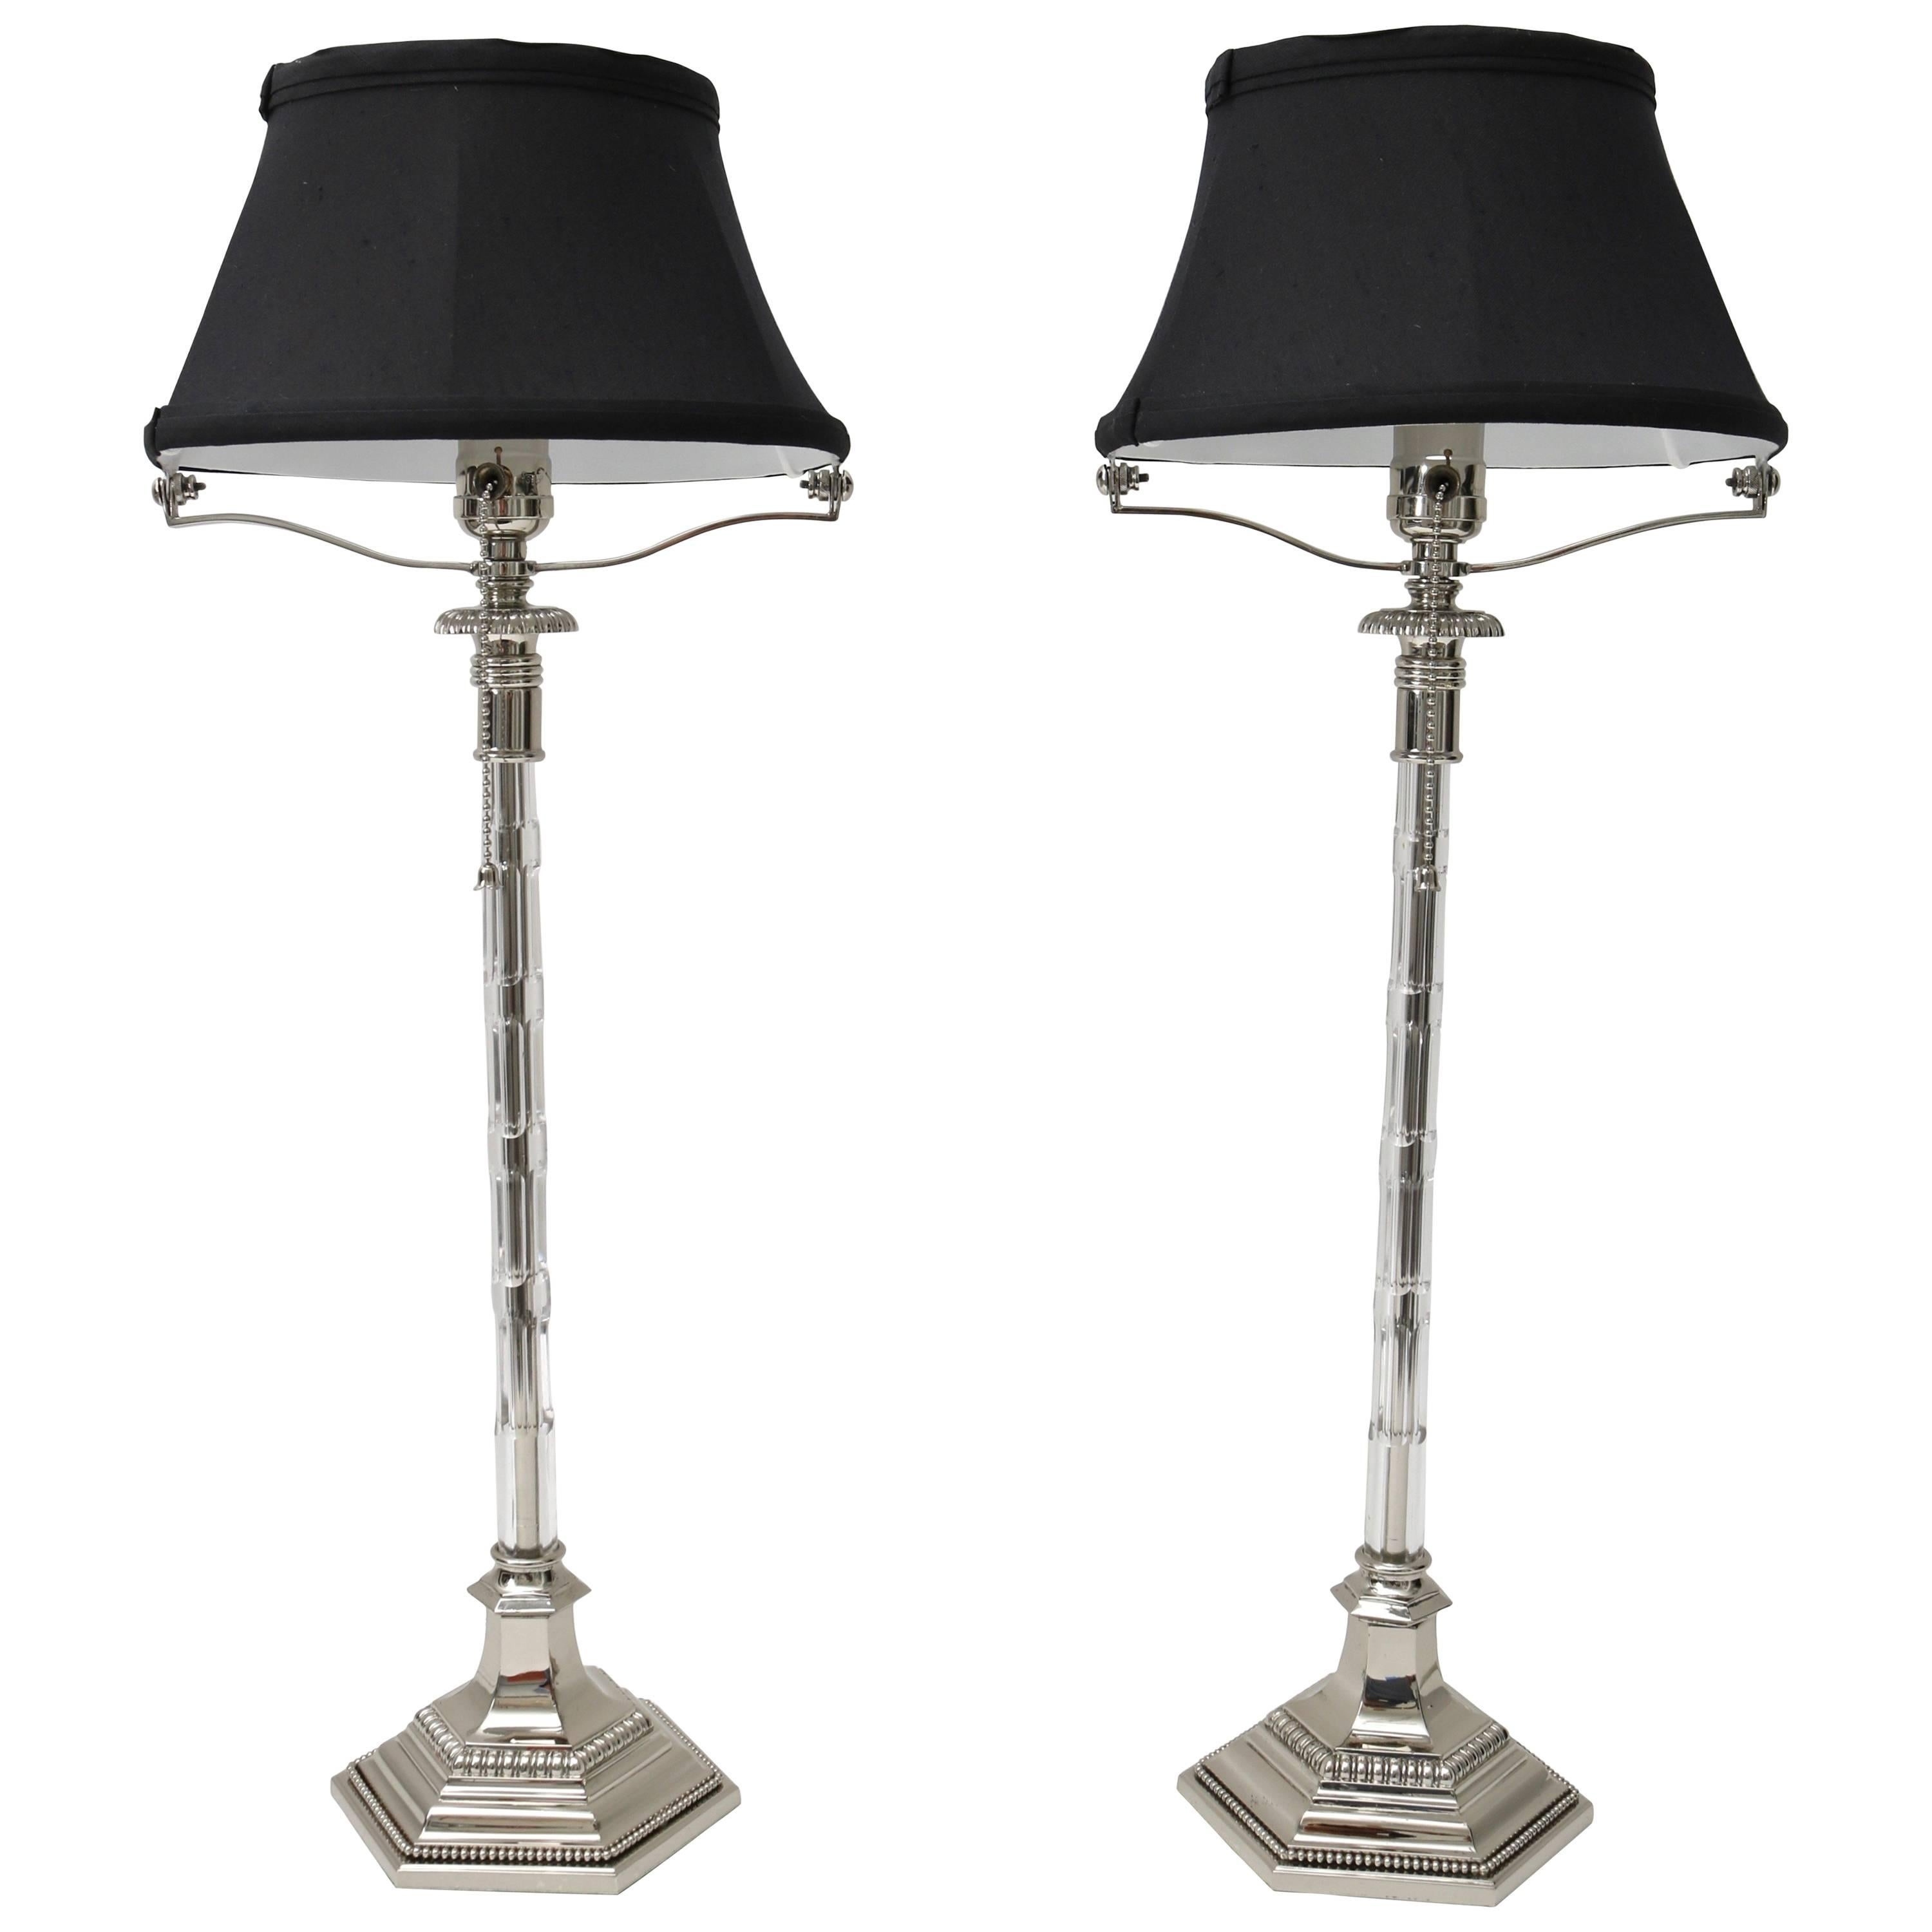 Pair of Art Deco Vanity Table Lamps, Nickle Plate and Cut Crystal, Black Shade